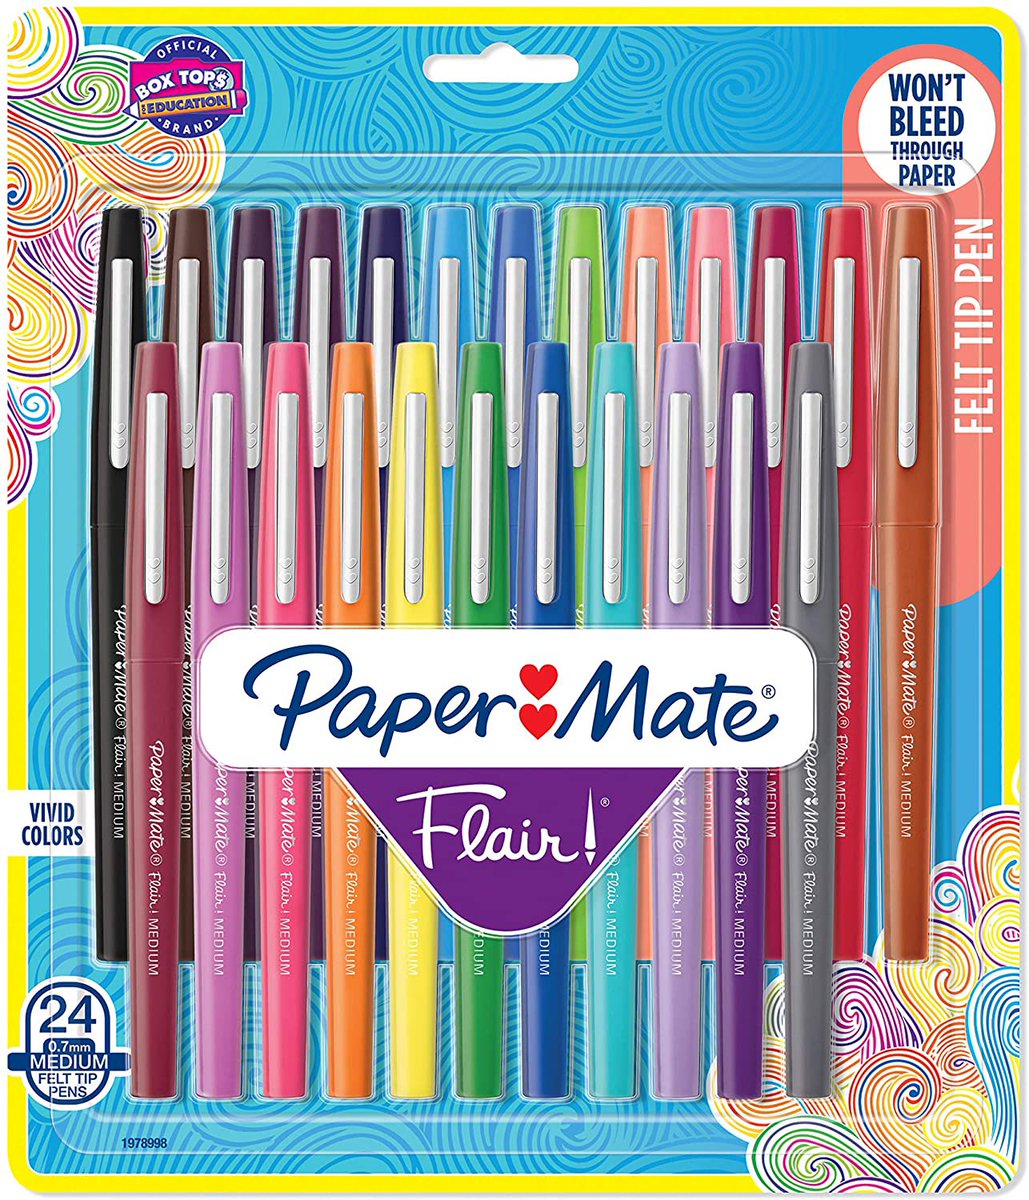 Papermate flair: great color variety, but thick felt tip. I hear teachers love these because they’re great for grading and I’d agree. Not ideal for annotating. Not sure they’d be stolen by attendings, would definitely be stolen by teachers though. 6/10